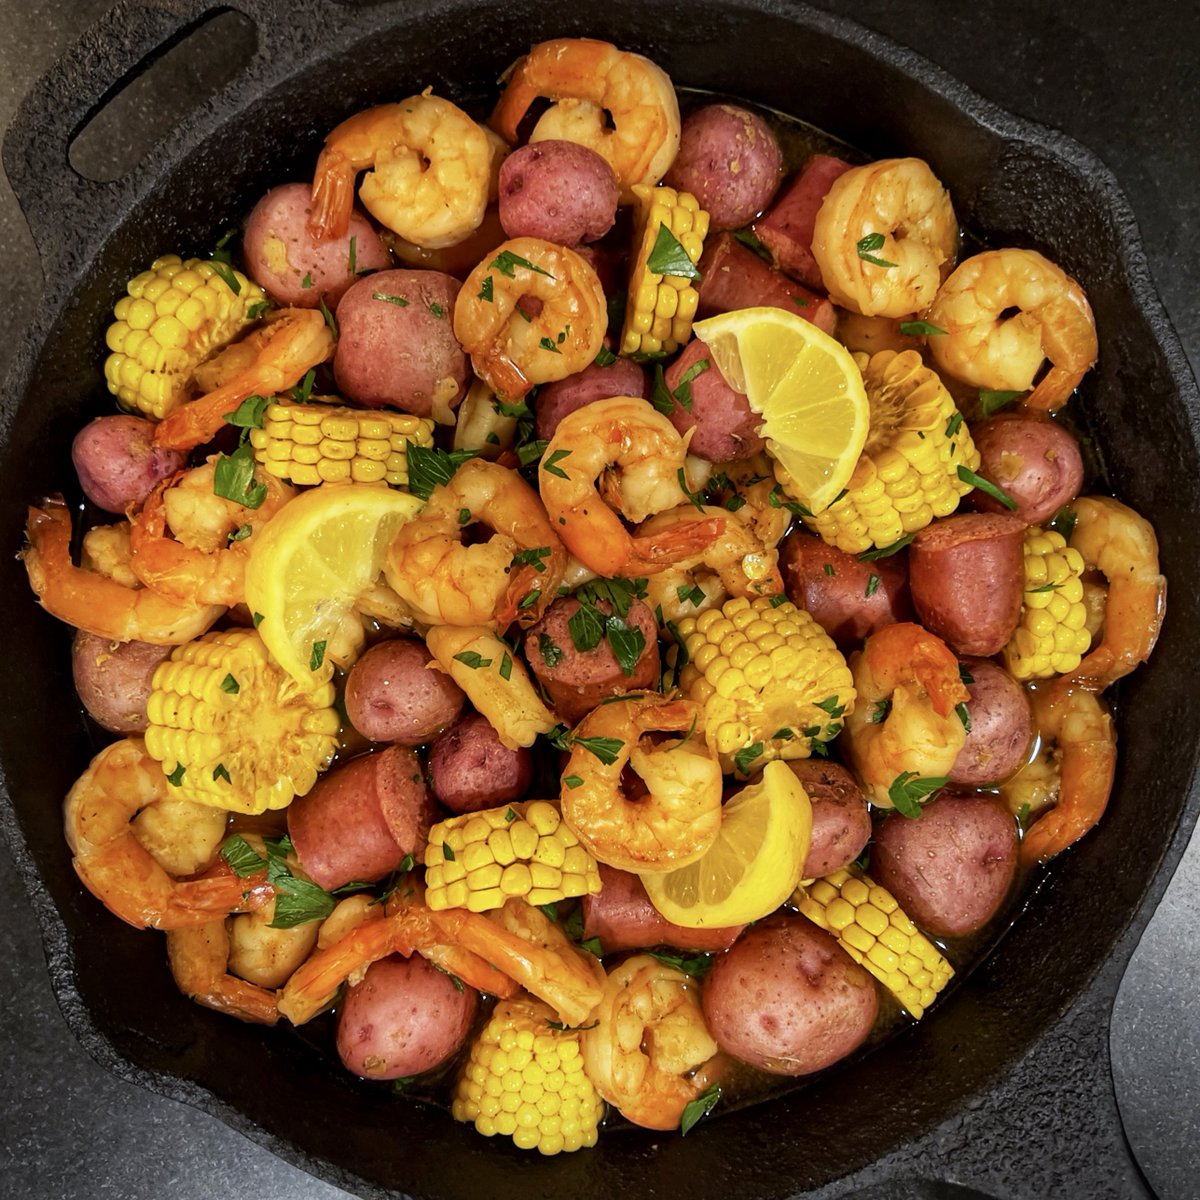 Shrimp boil in #ElBarrio.

Why futz with grimy coals and dirty grills when you can throw #seafood and veggies in a cauldron of bubbling court-bouillon?* For these shrimp, smoked sausages, potatoes, and corn, it's officially hot simmer summer.

*Old Bay, Tabasco, and beer

#foodie